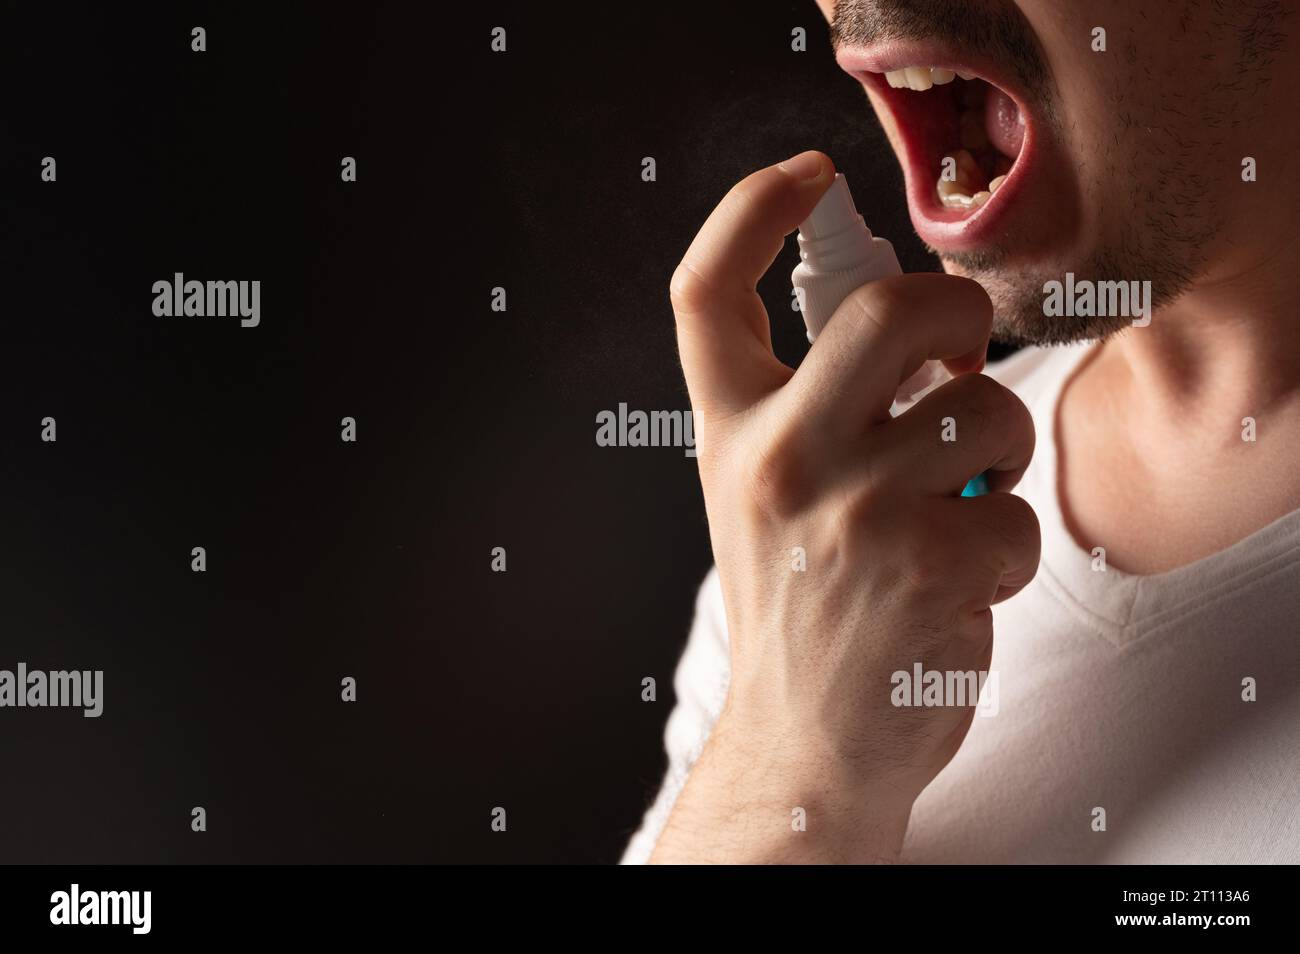 Man spray his throat close up view isolated on black background Stock Photo